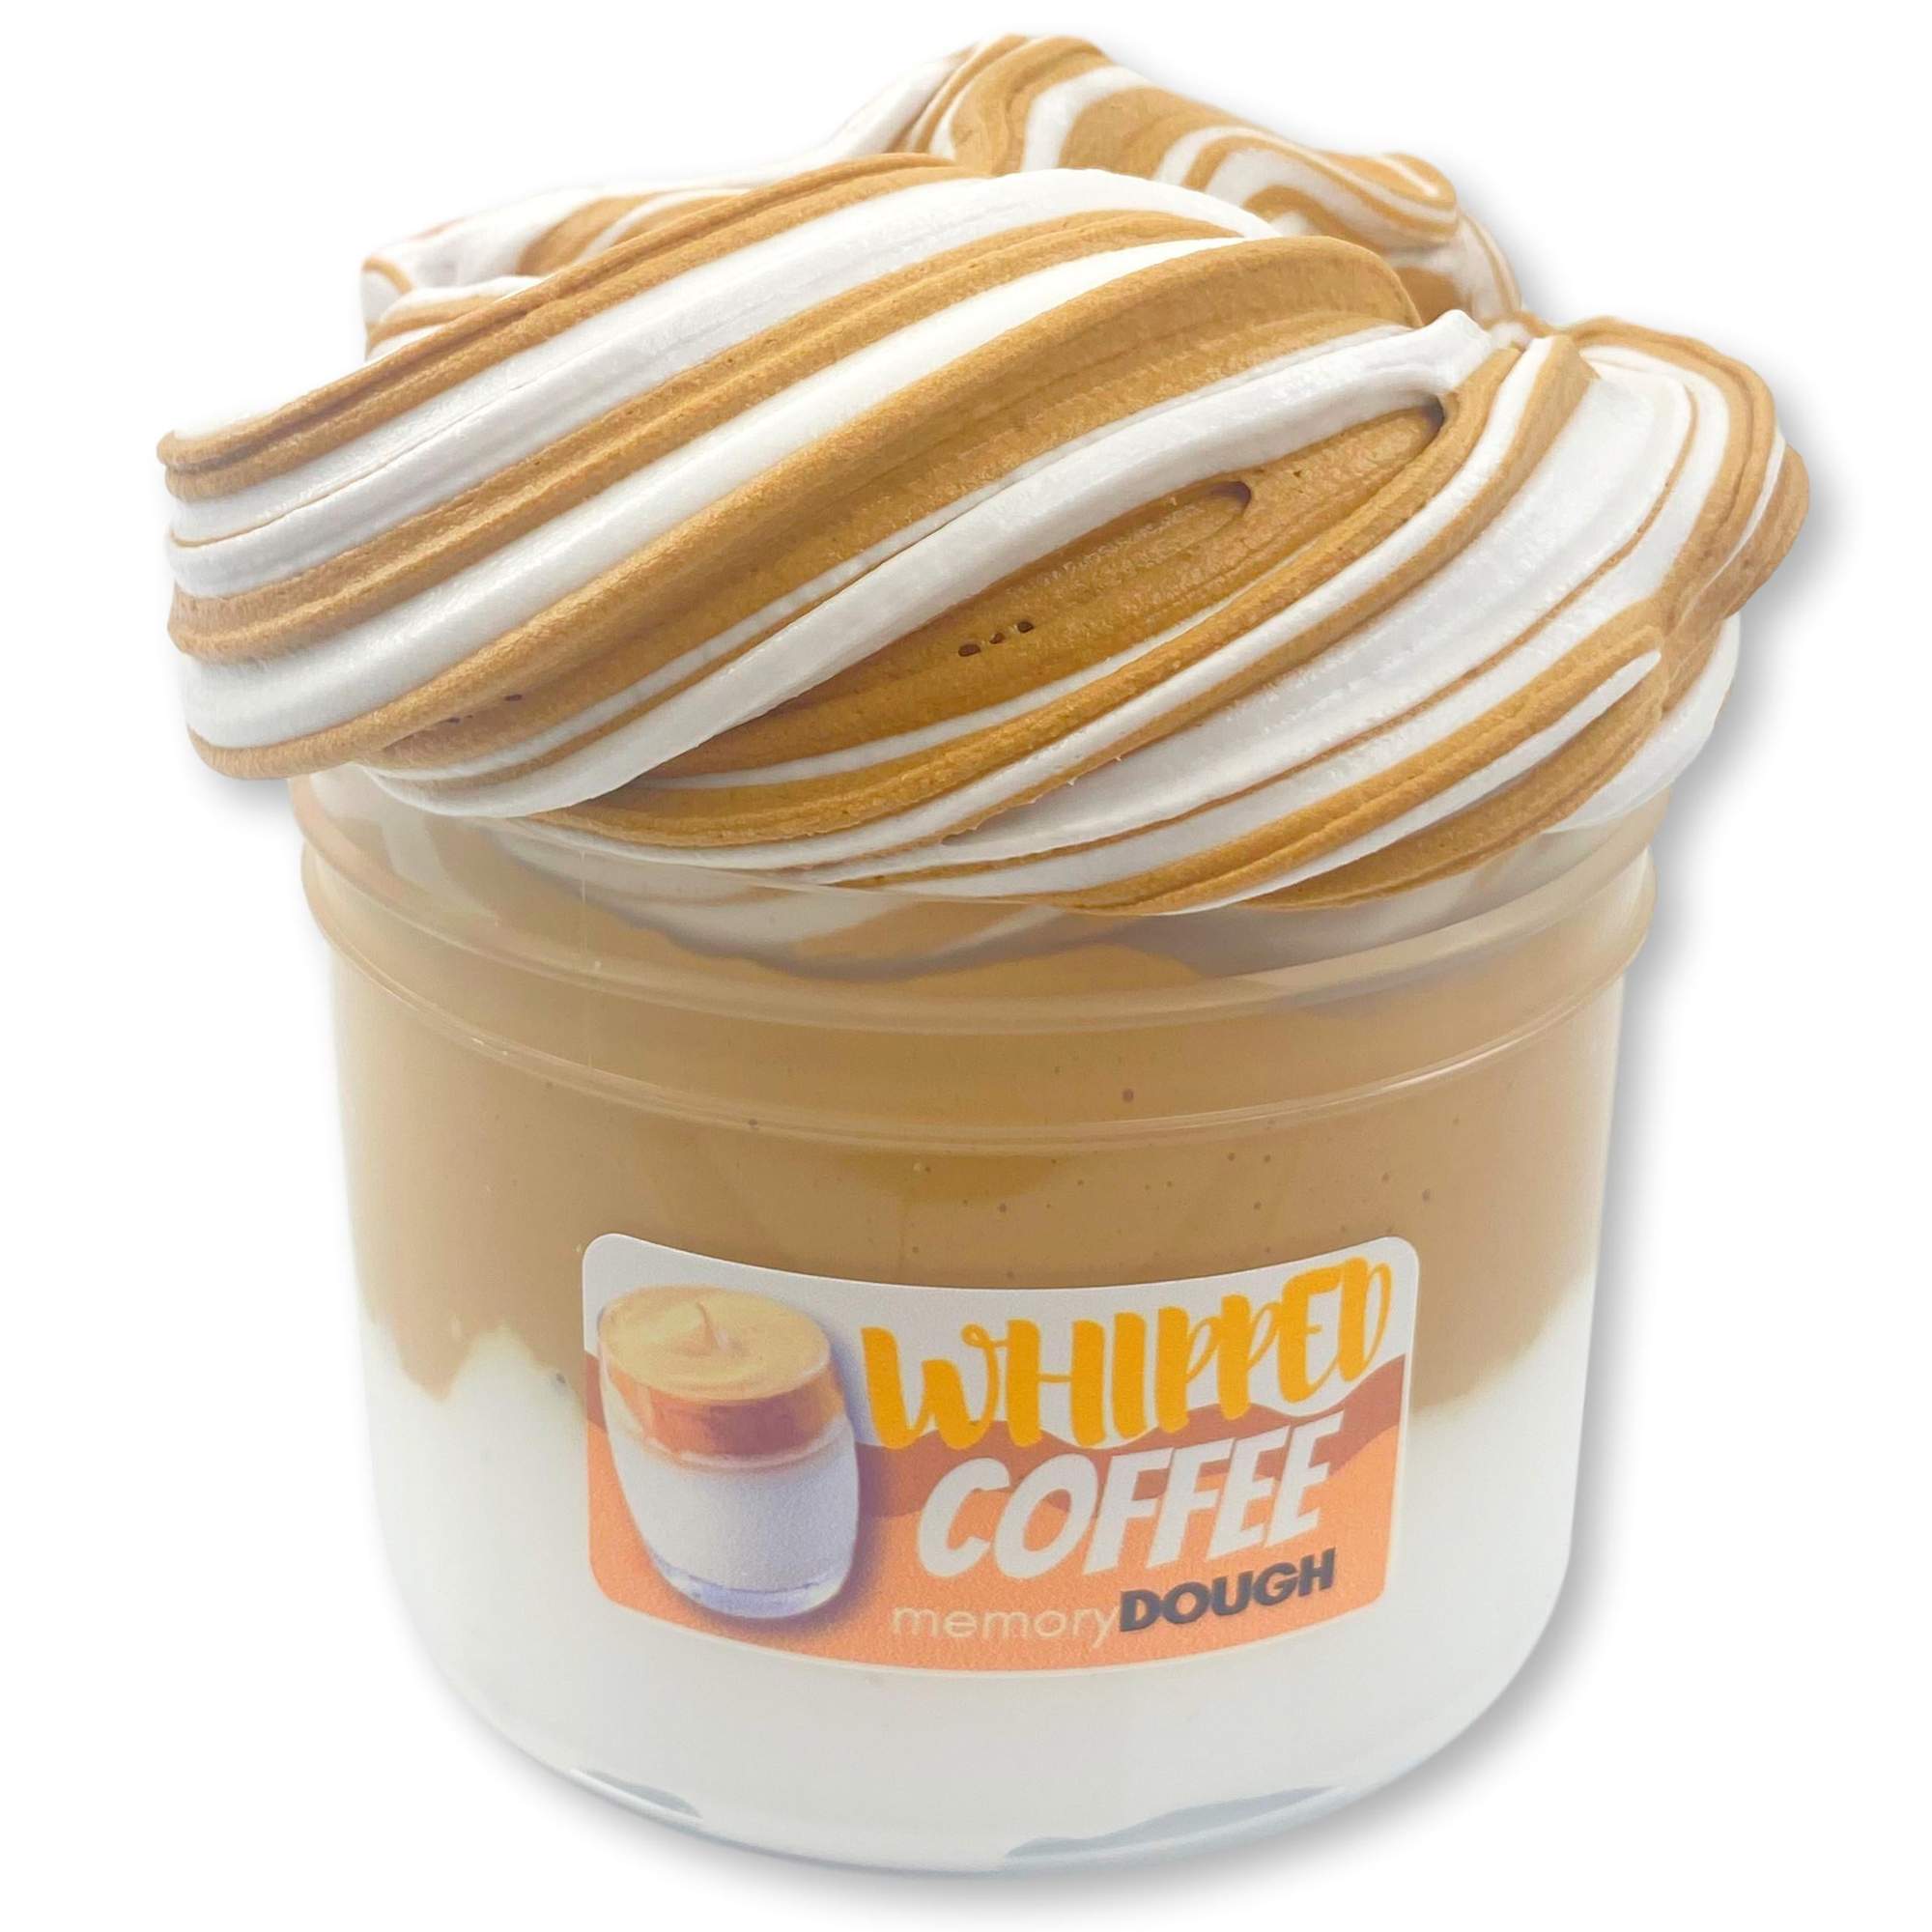 Whipped Coffee memoryDOUGH® - Wholesale Case of 18